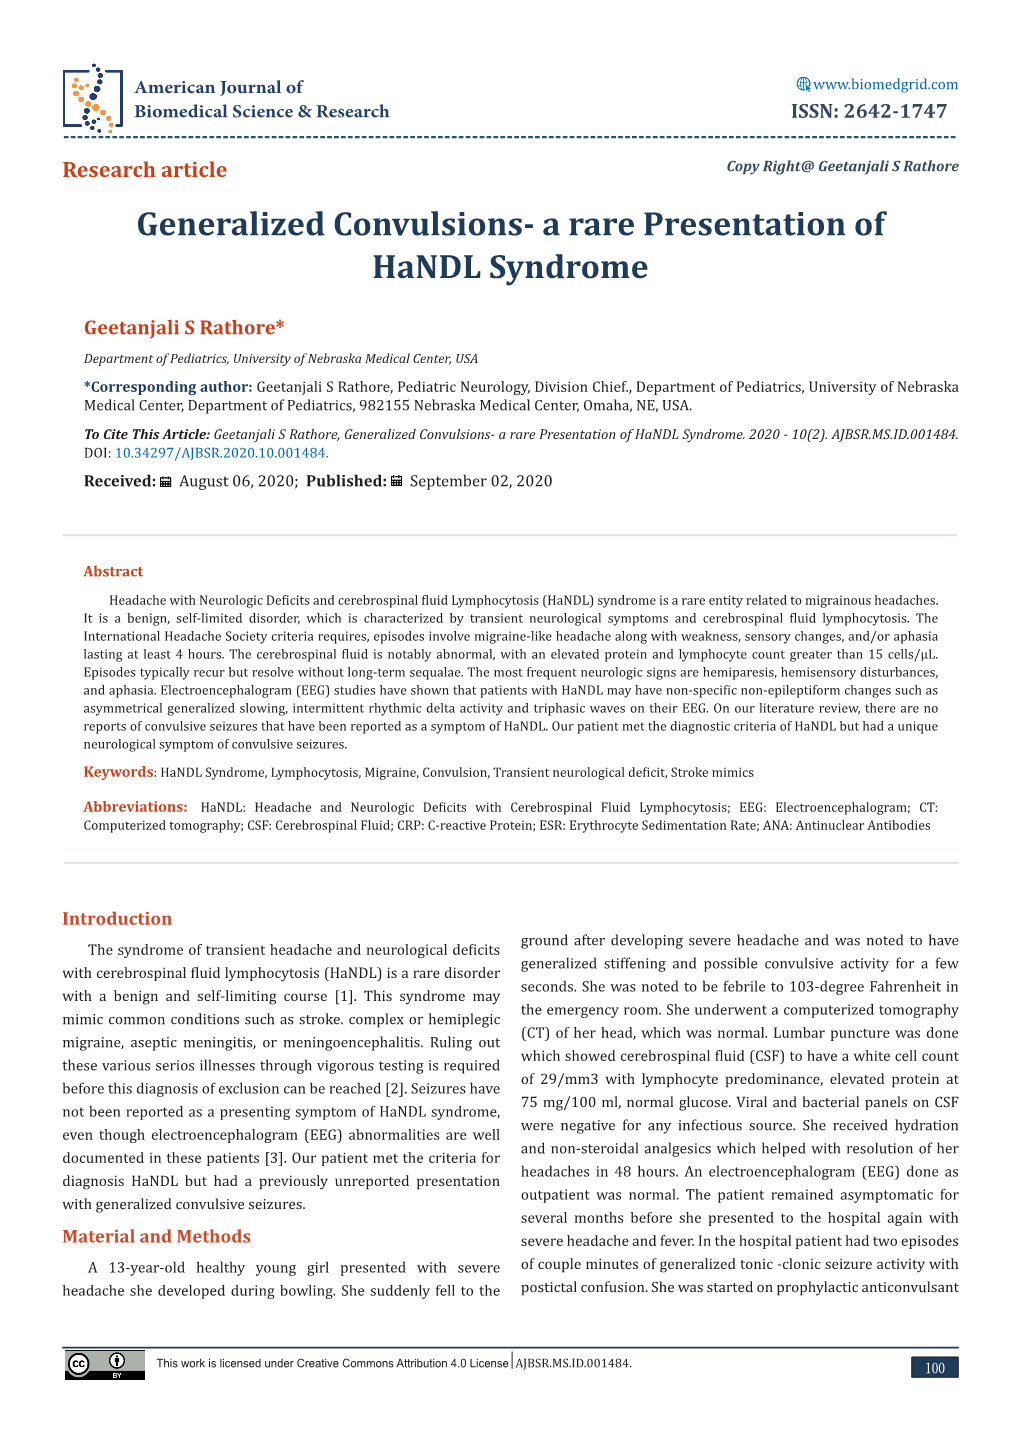 Generalized Convulsions- a Rare Presentation of Handl Syndrome